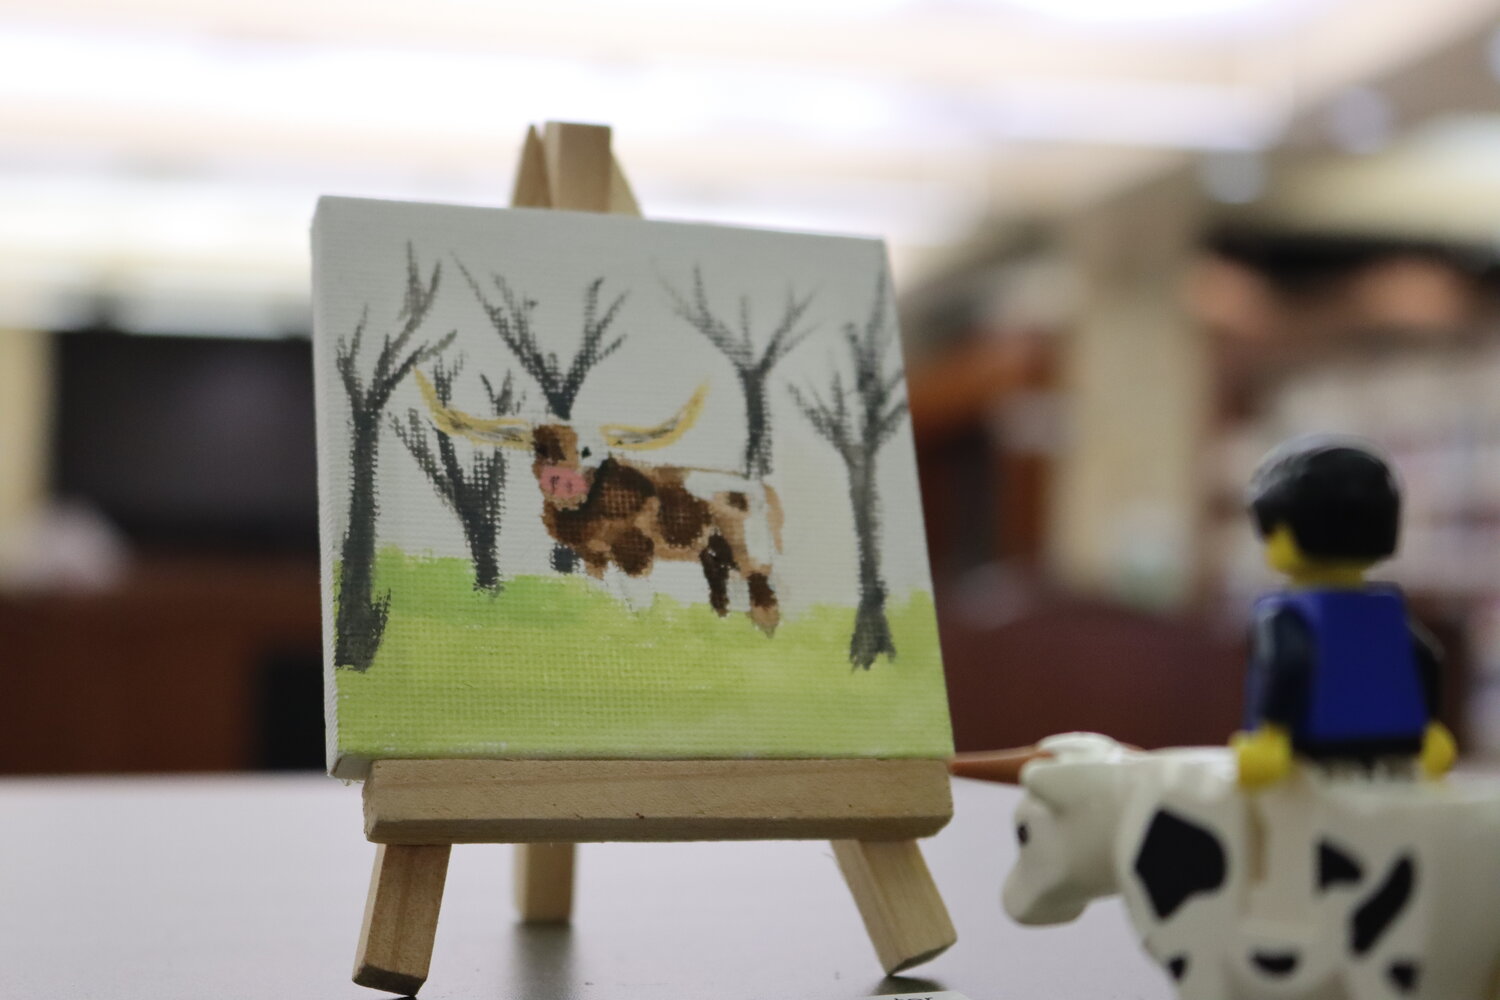 Adult Services Librarian Rebecca Buchanan matched Lego figures to the subjects and themes in each painting.